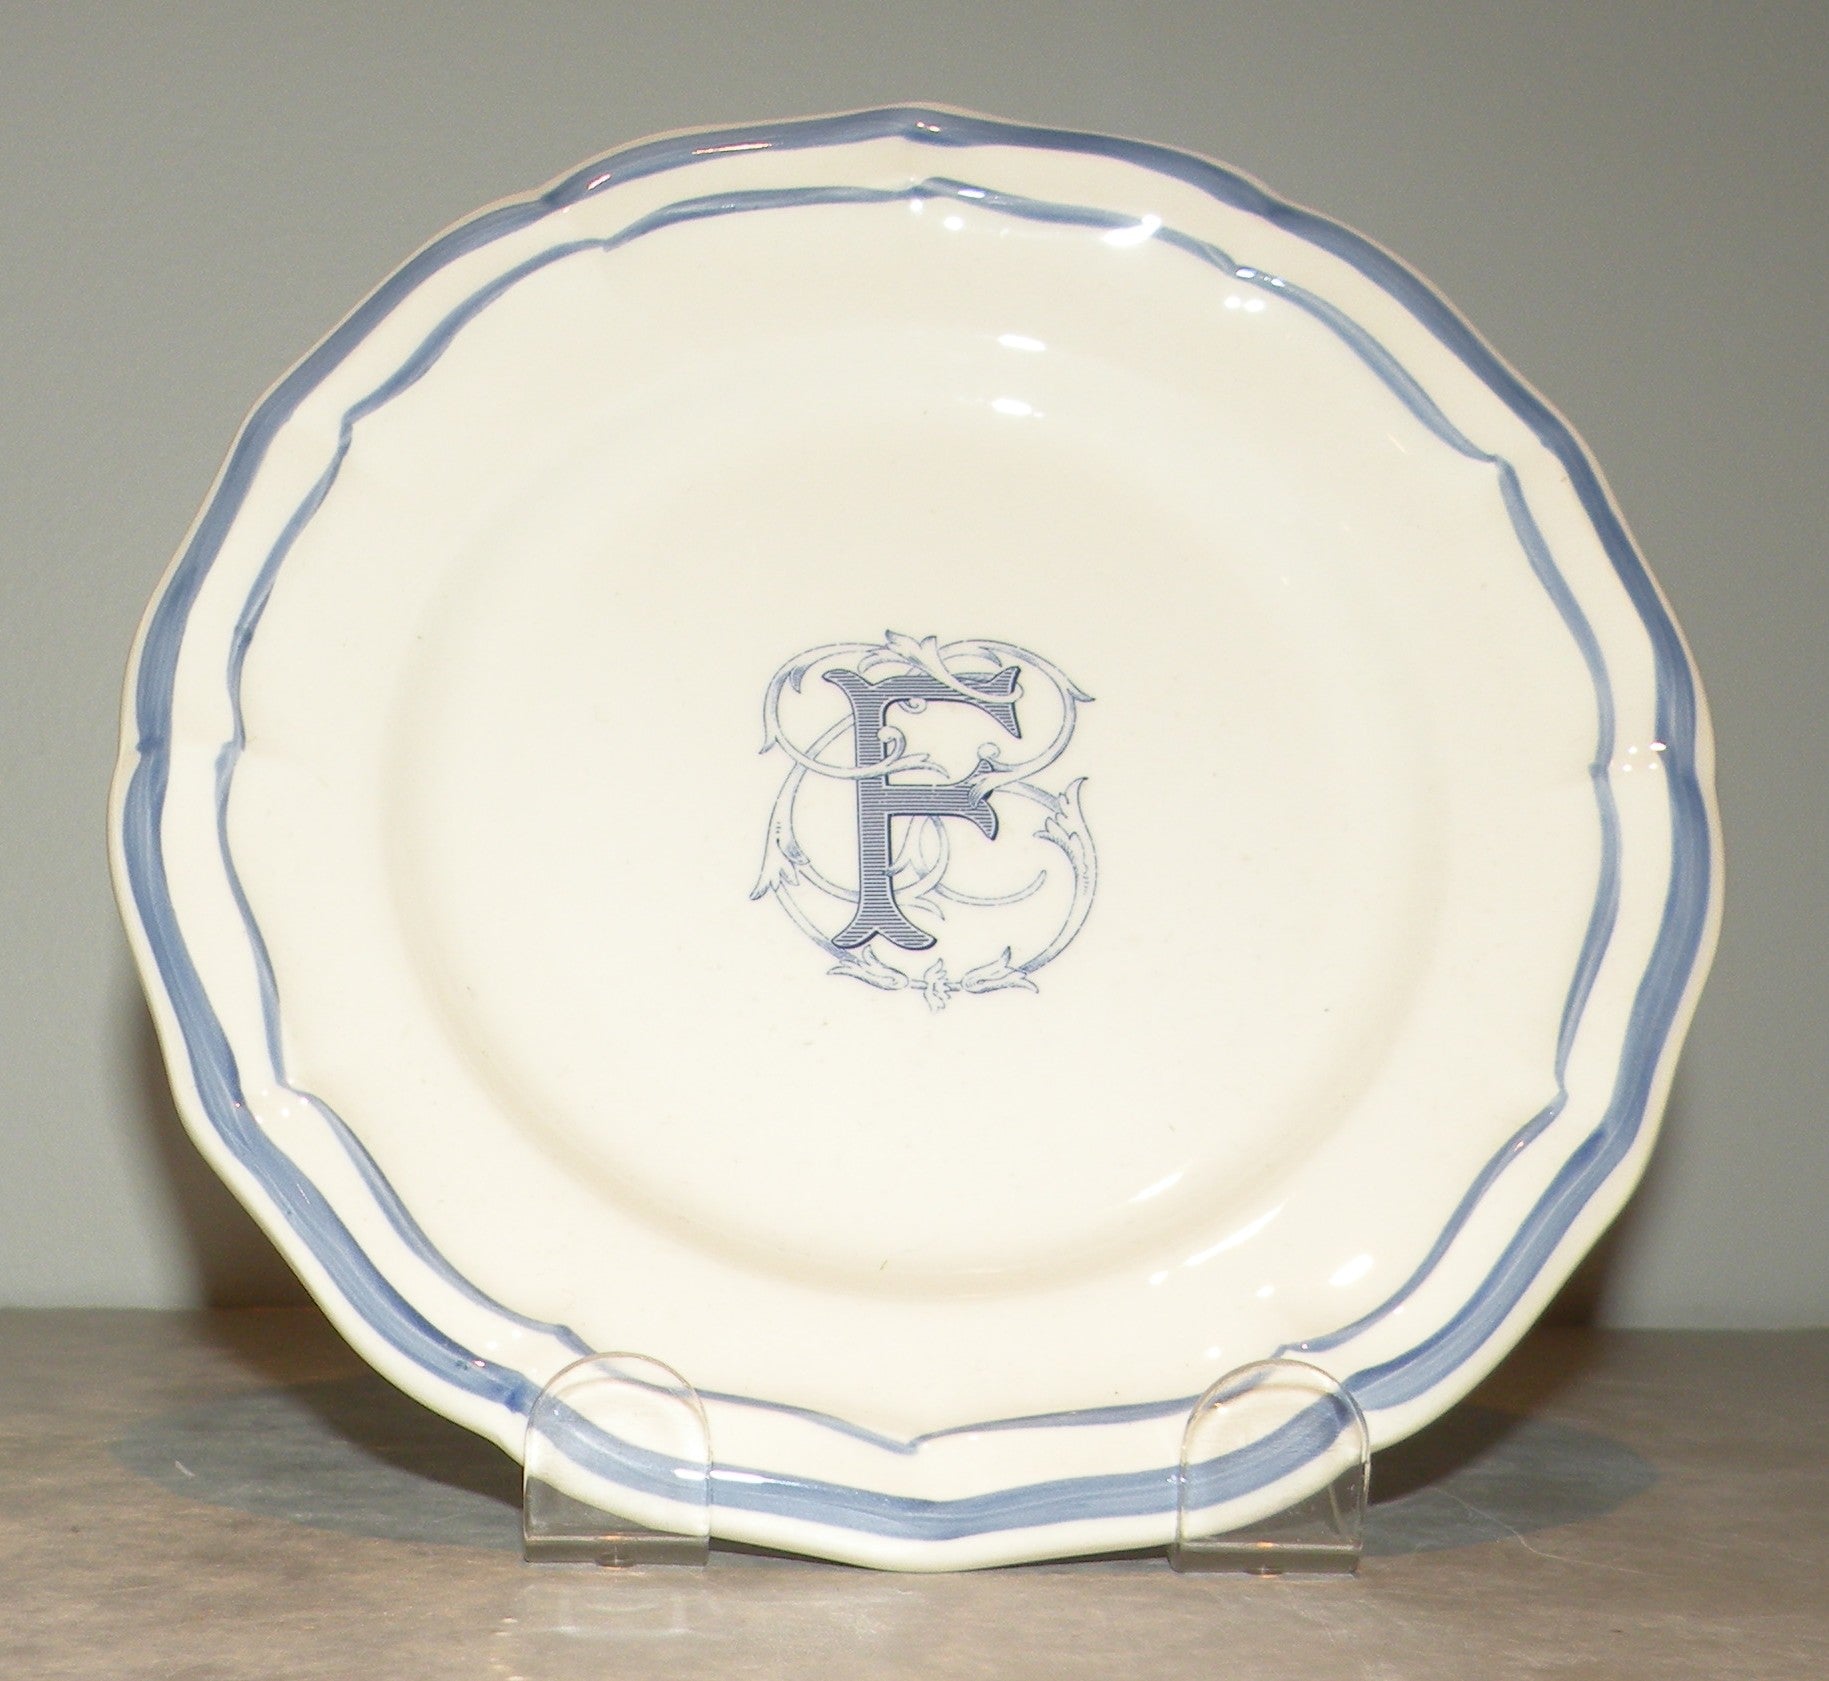 Bread & Butter Plate with the letter F , Filet Bleu Monogramme